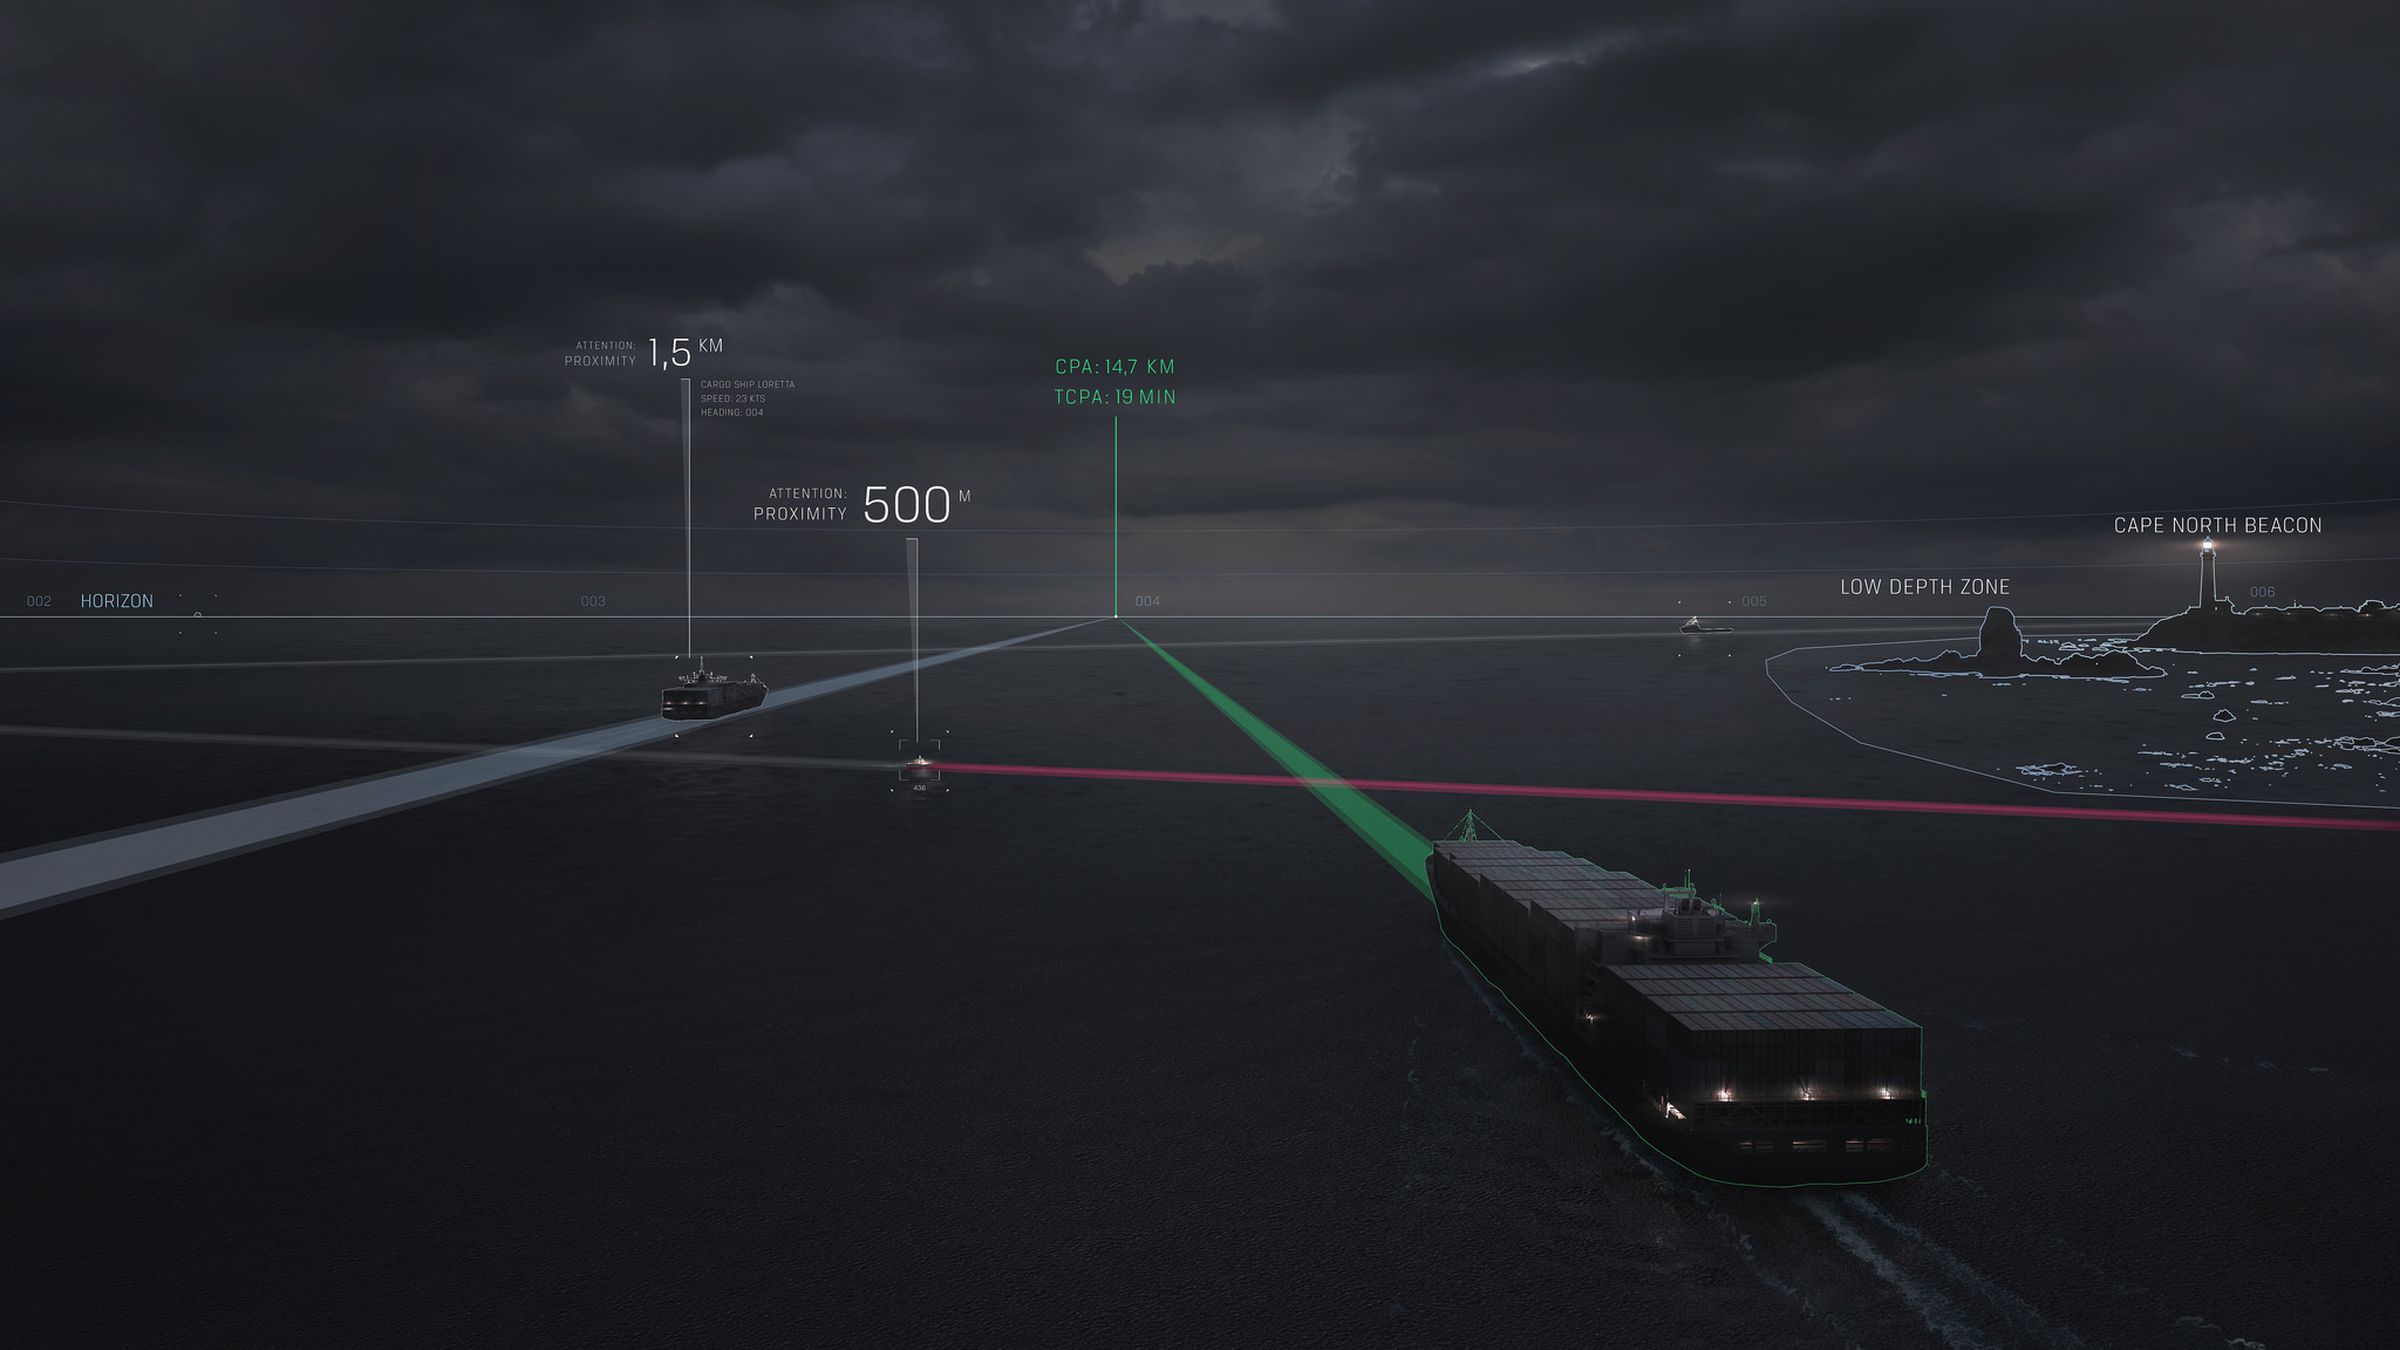 Rolls-Royce’s Intelligent Awareness system coordinates data from multiple systems to tell crew about nearby vessels and obstacles. 